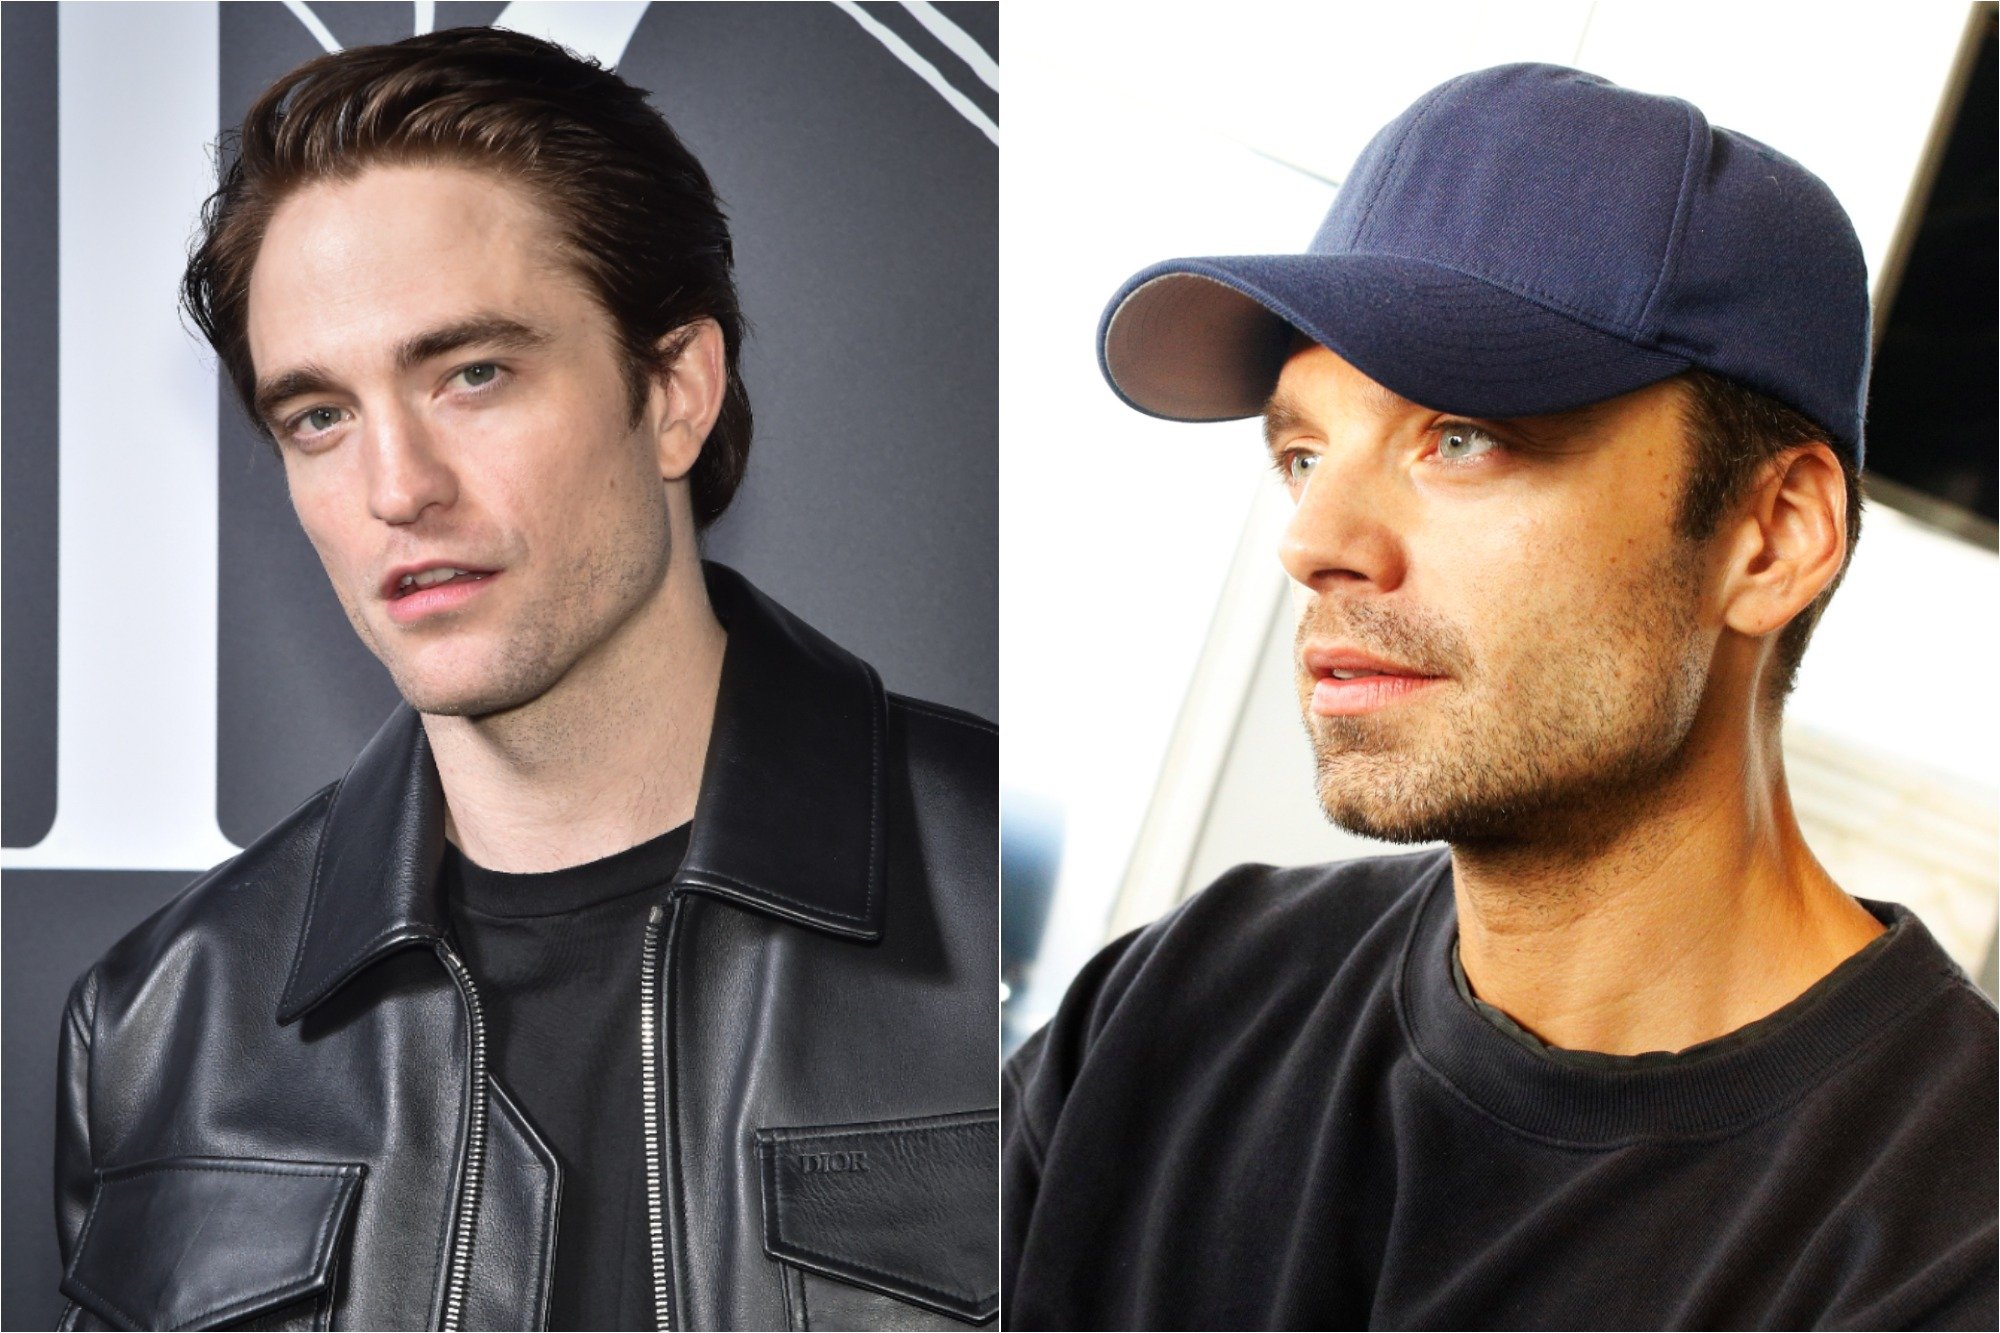 Robert Pattinson at the Dior Homme Menswear Fall/Winter 2020-2021 show, part of Paris Fashion Week on Jan. 17, 2020 / Sebastian Stan at the MDC Productions' 3rd Annual Face Off to Fight Cancer at the Sky Rink at Chelsea Piers on Oct. 27, 2019.